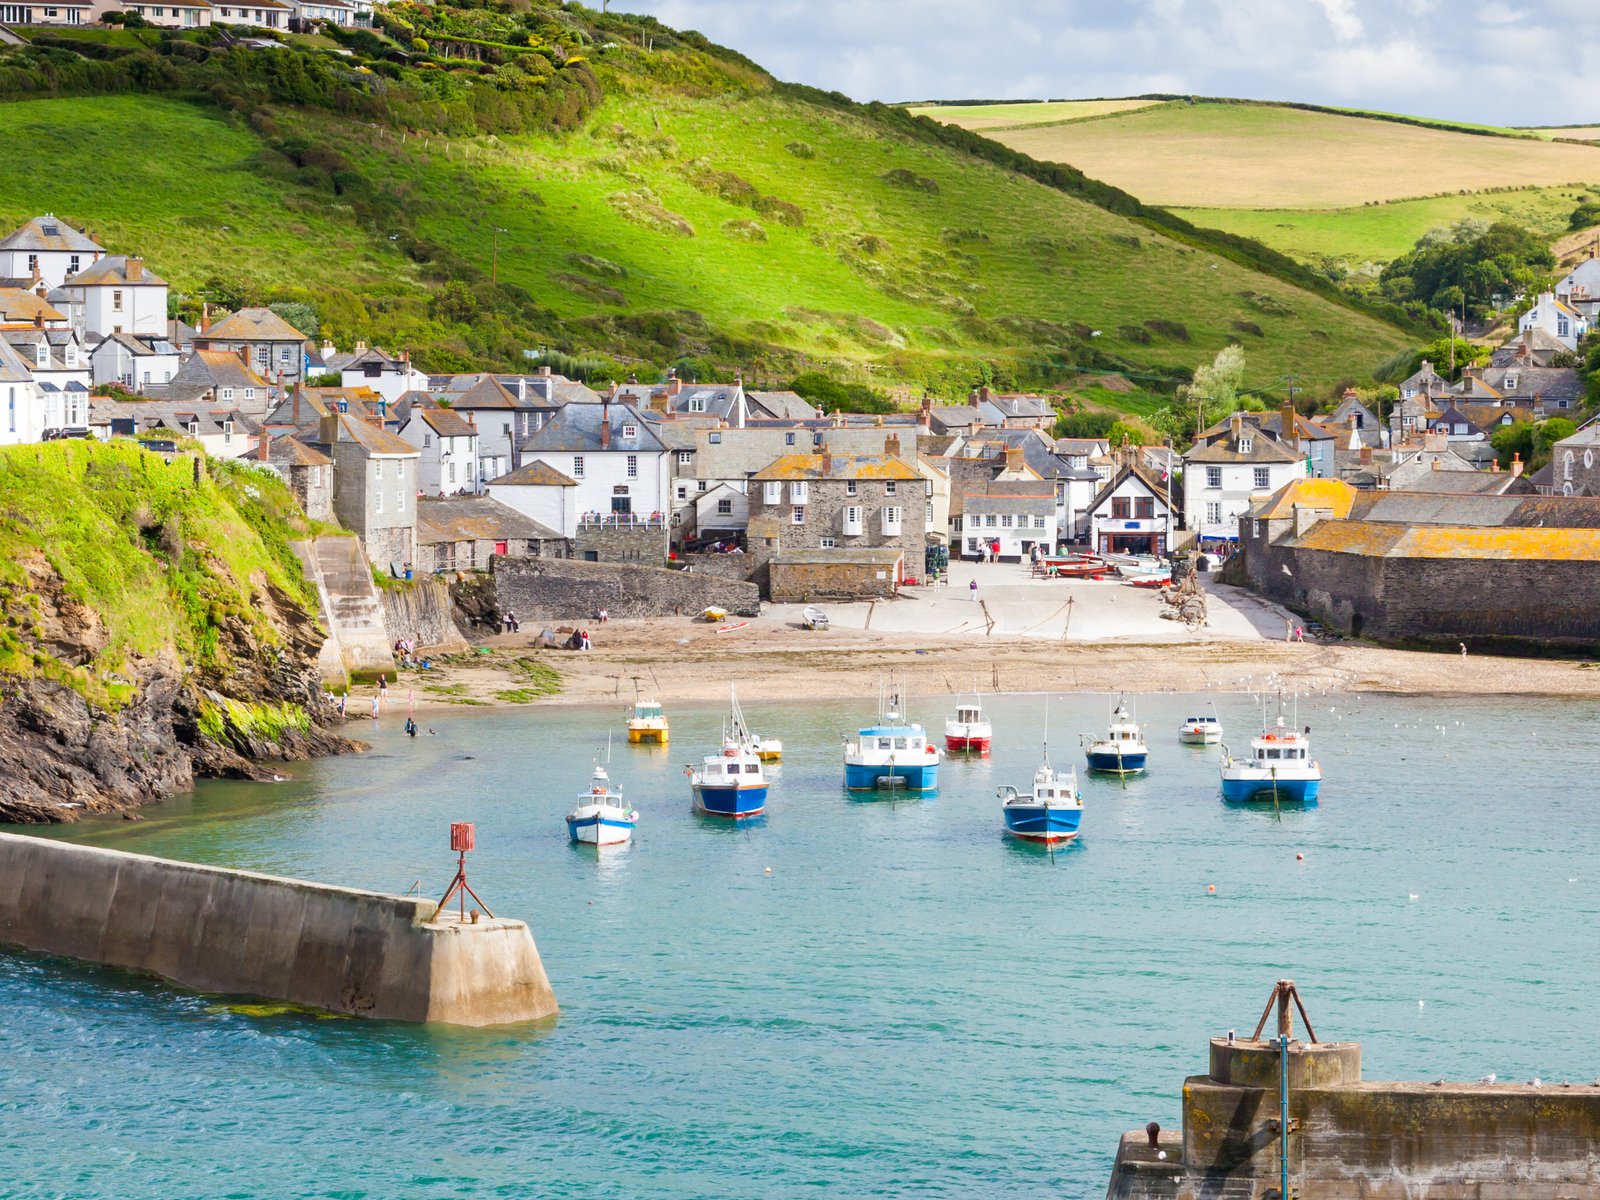 Besides the stunning landscapes, Cornwall is also famous for its seafood, meat pasties&nbsp;and ice cream.&nbsp;